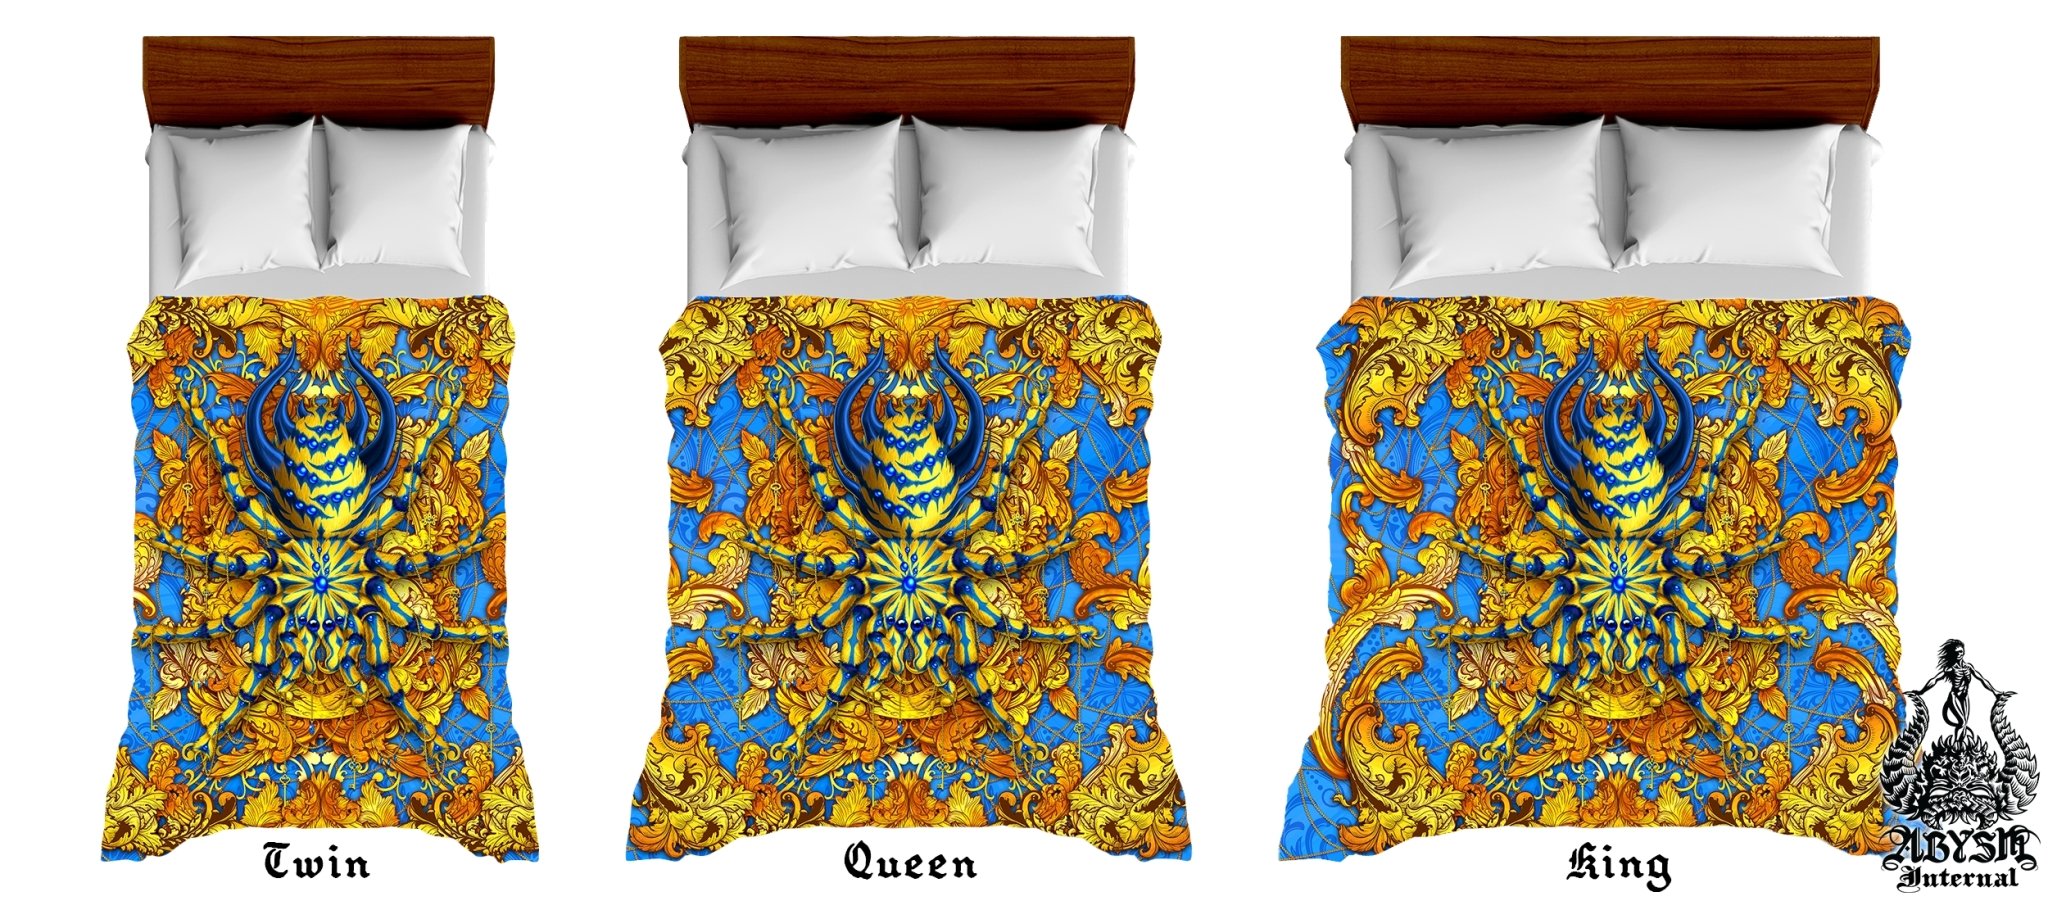 Spider Bedding Set, Comforter and Duvet, Bed Cover and Bedroom Decor, King, Queen and Twin Size - Tarantula Cyan and Gold - Abysm Internal